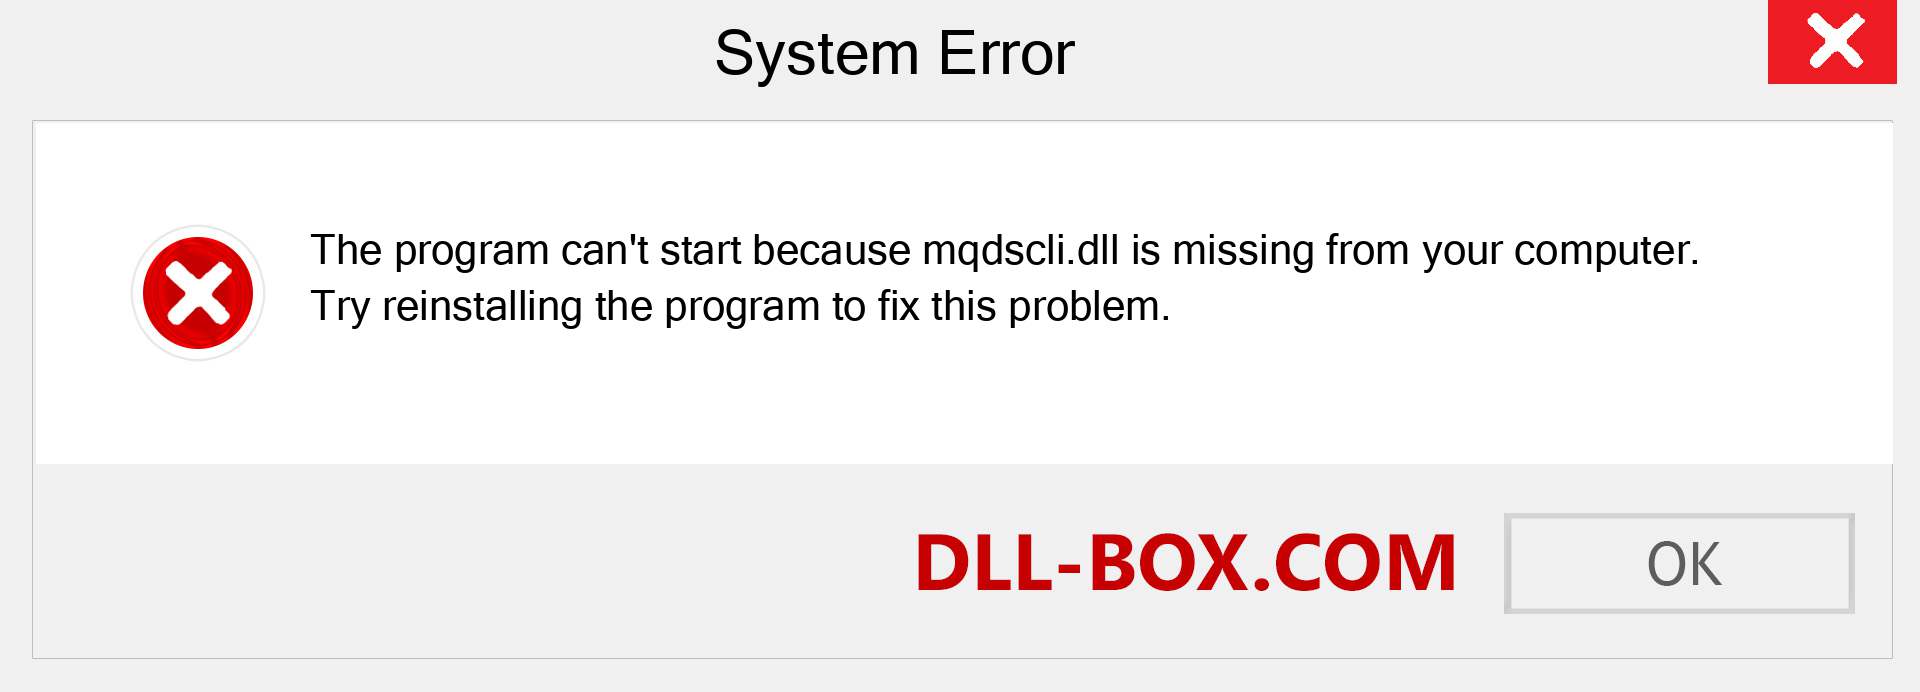  mqdscli.dll file is missing?. Download for Windows 7, 8, 10 - Fix  mqdscli dll Missing Error on Windows, photos, images